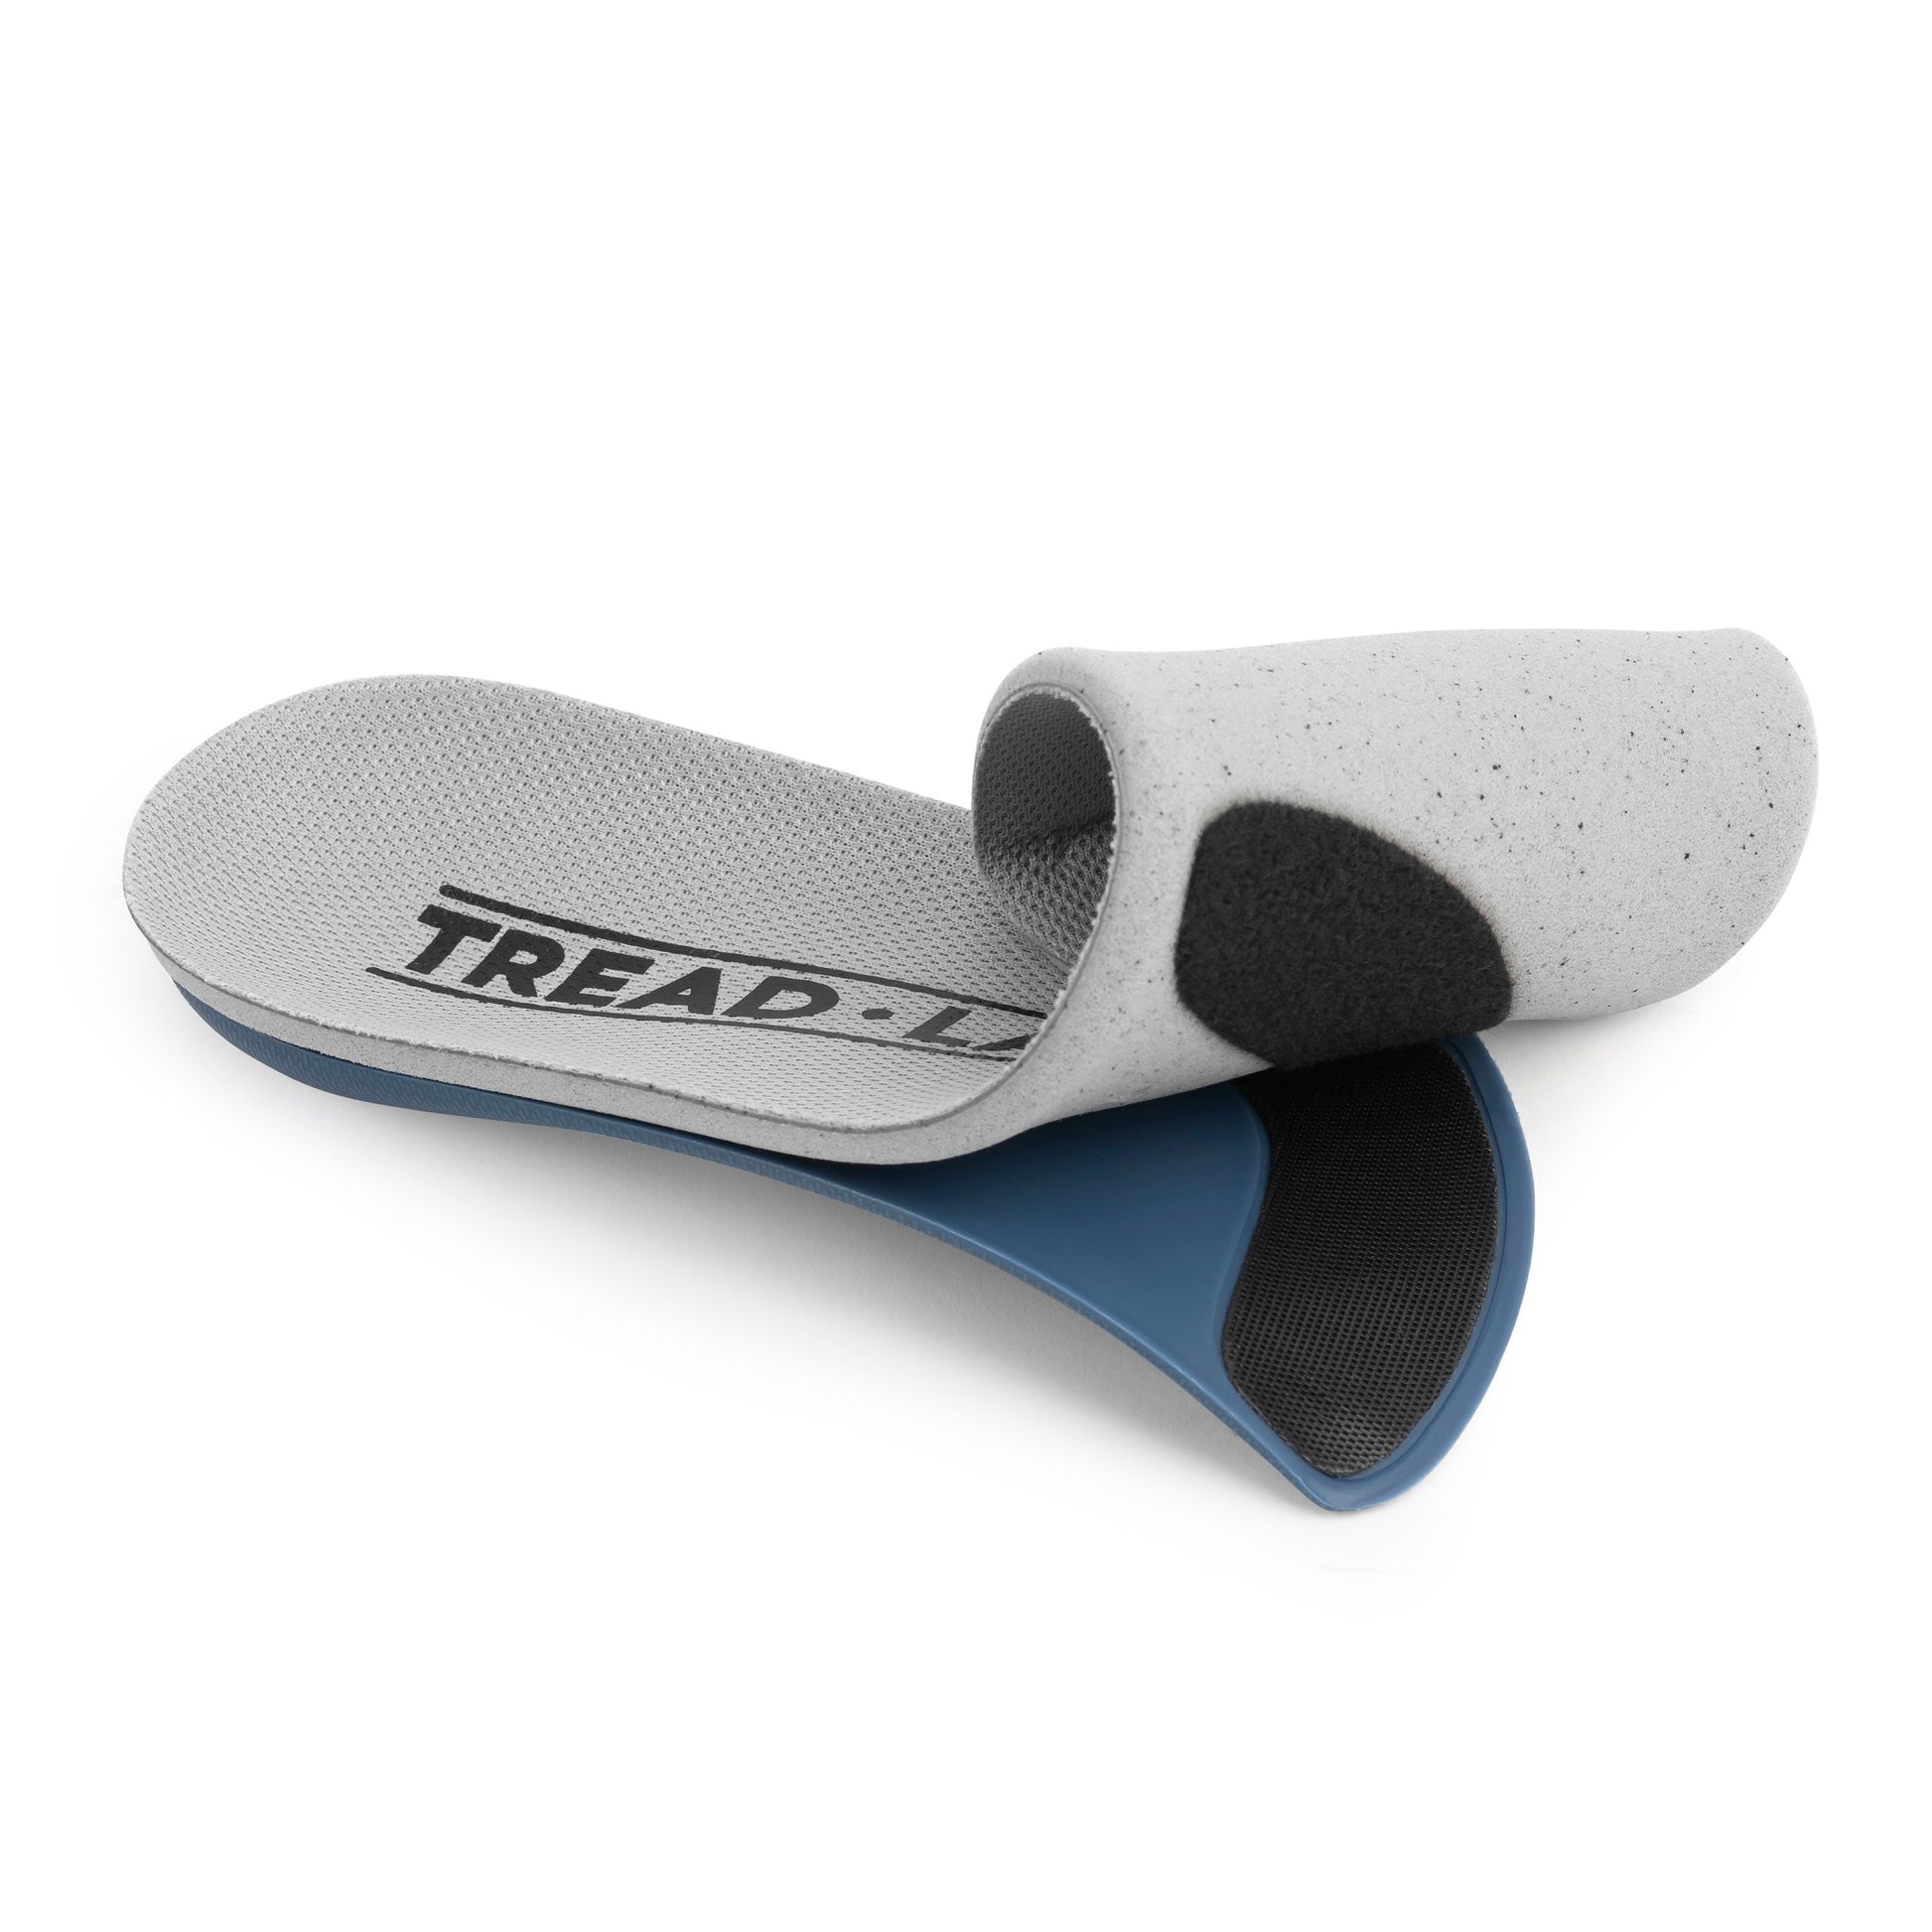 Pace refurbished orthotic insoles by Tread Labs